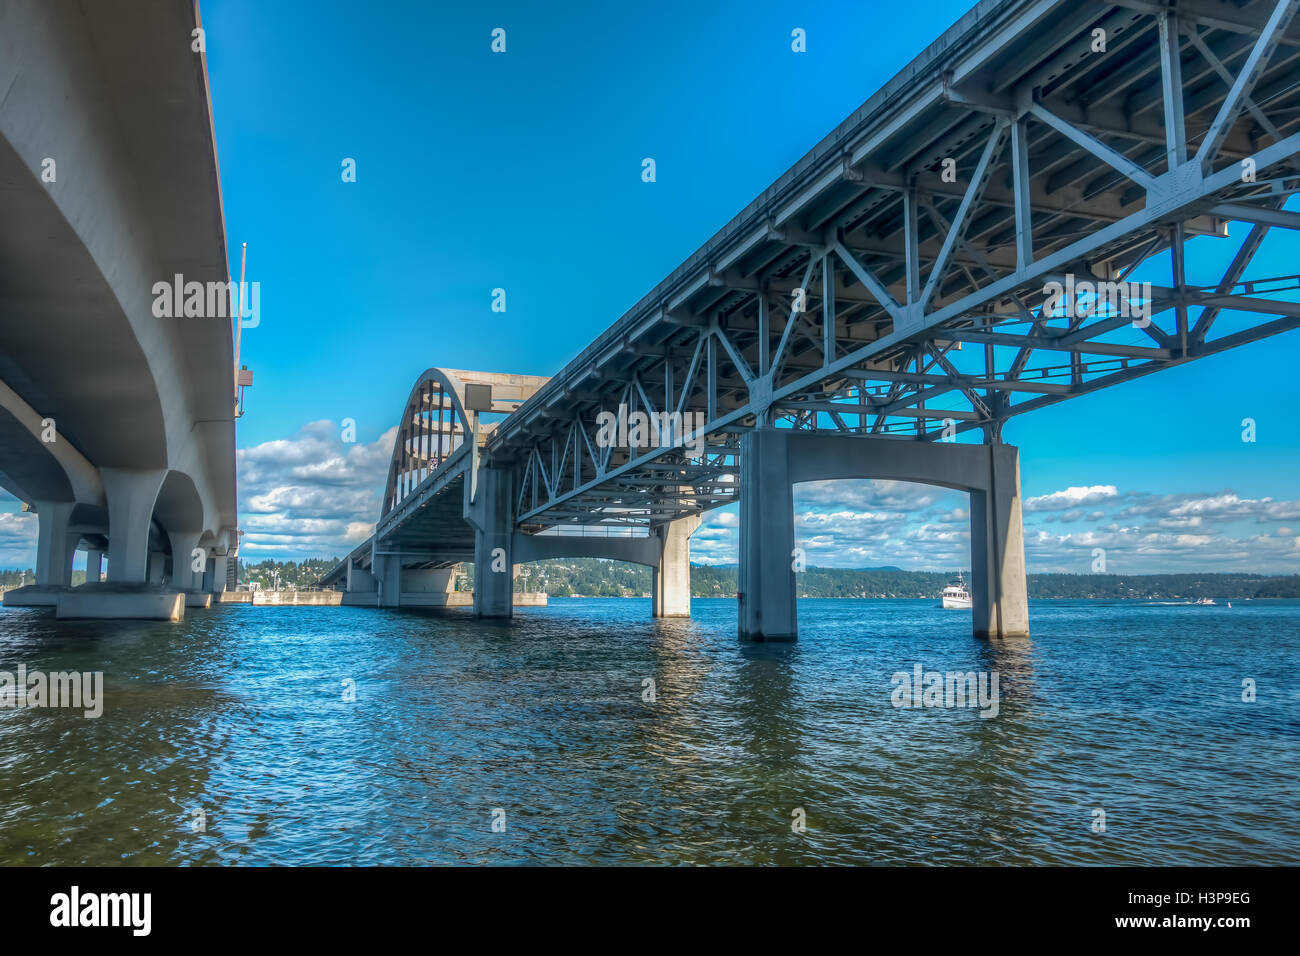 A view from beneath the I-90 bridge in Seattle, Washington. HDR image. Stock Photo